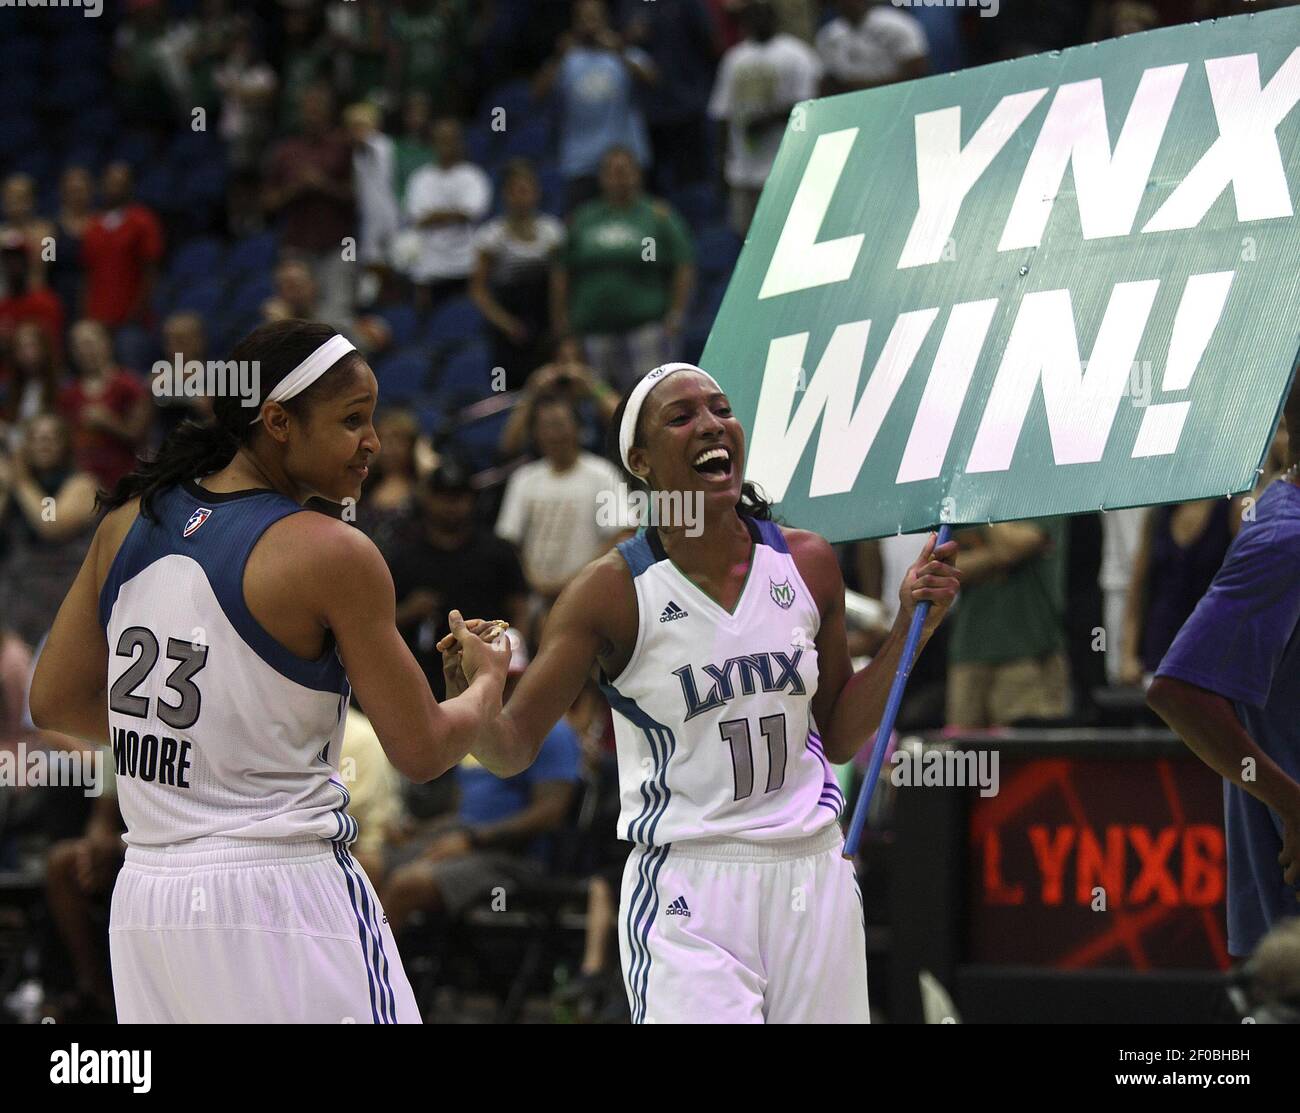 Minnesota Lynx teammates Maya Moore (23) and Candice Wiggins (11) celebrate a 92-76 win over the Seattle Storm at Target Center in Minneapolis, Minnesota, Friday, July 29, 2011. (Photo by Kyndell Harkness/Minneapolis Star Tribune/MCT/Sipa USA) Stock Photo